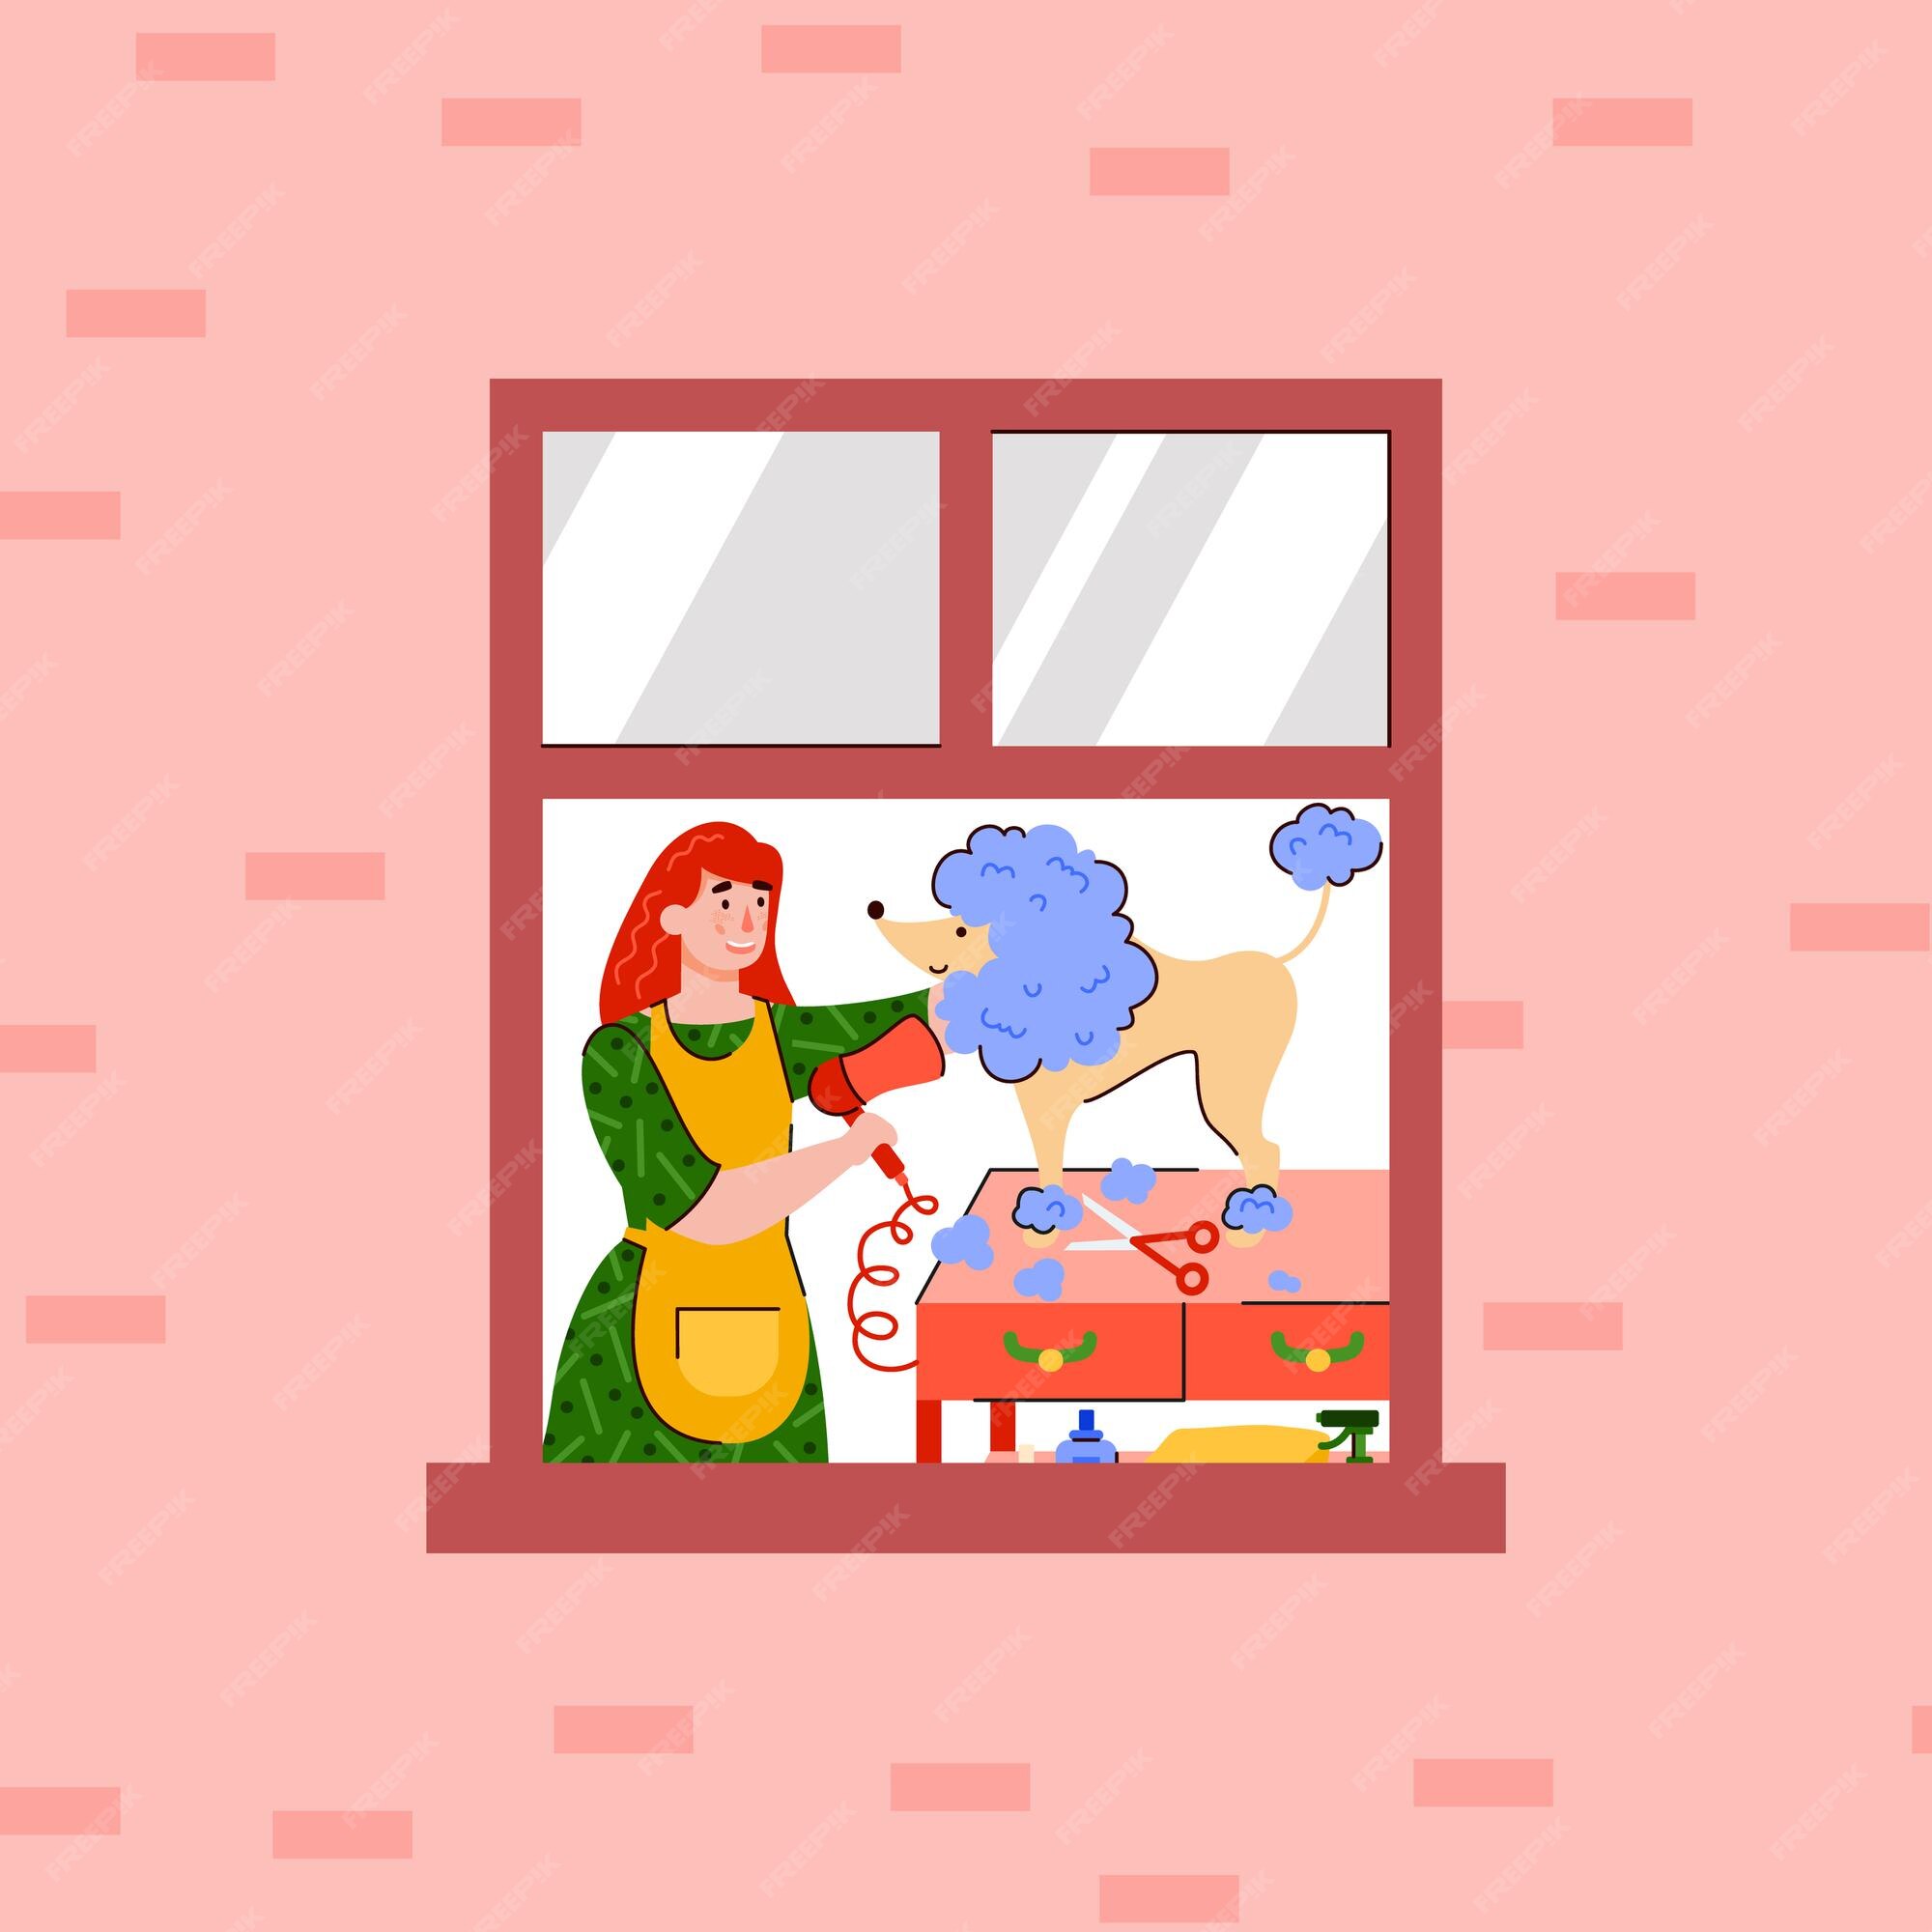 Premium Vector | Woman cartoon character takes care of her pet dog at home,  flat vector illustration. cartoon characters of young girl and dog in  window frame of building.